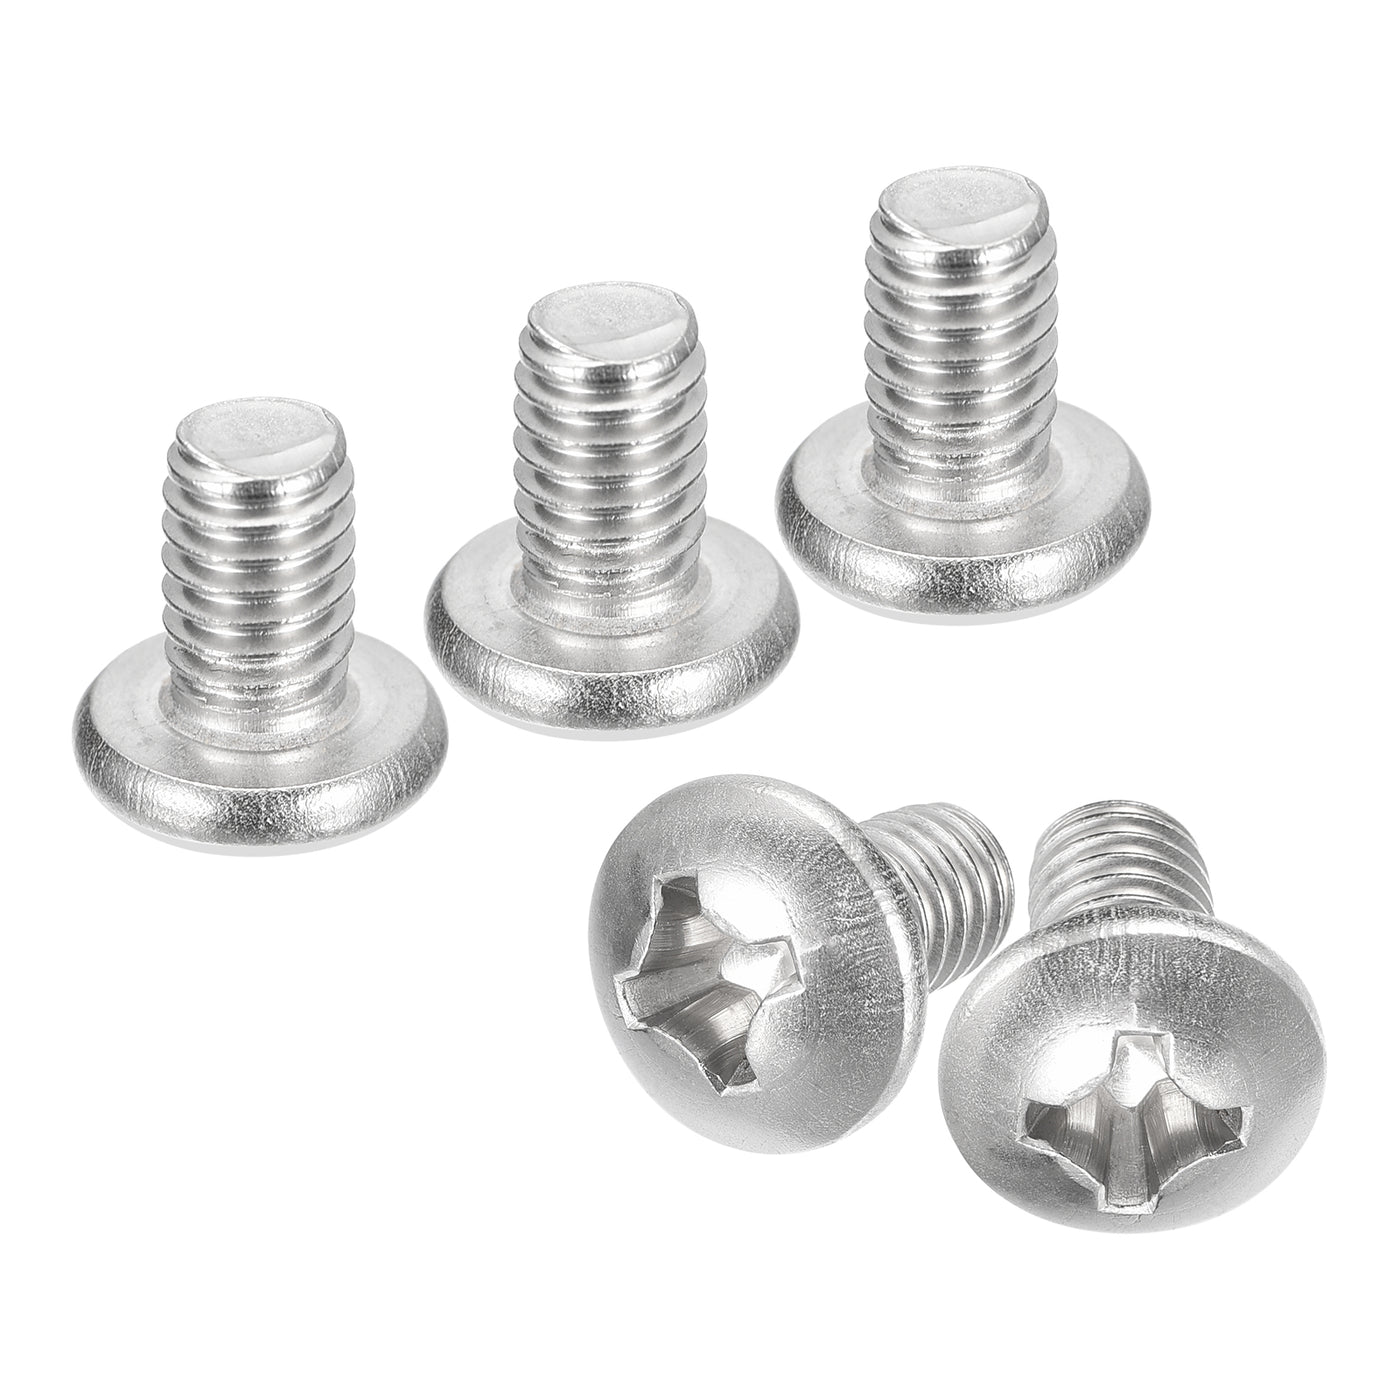 uxcell Uxcell 5/16-18x1/2" Pan Head Machine Screws, Stainless Steel 18-8 Screw, Pack of 5